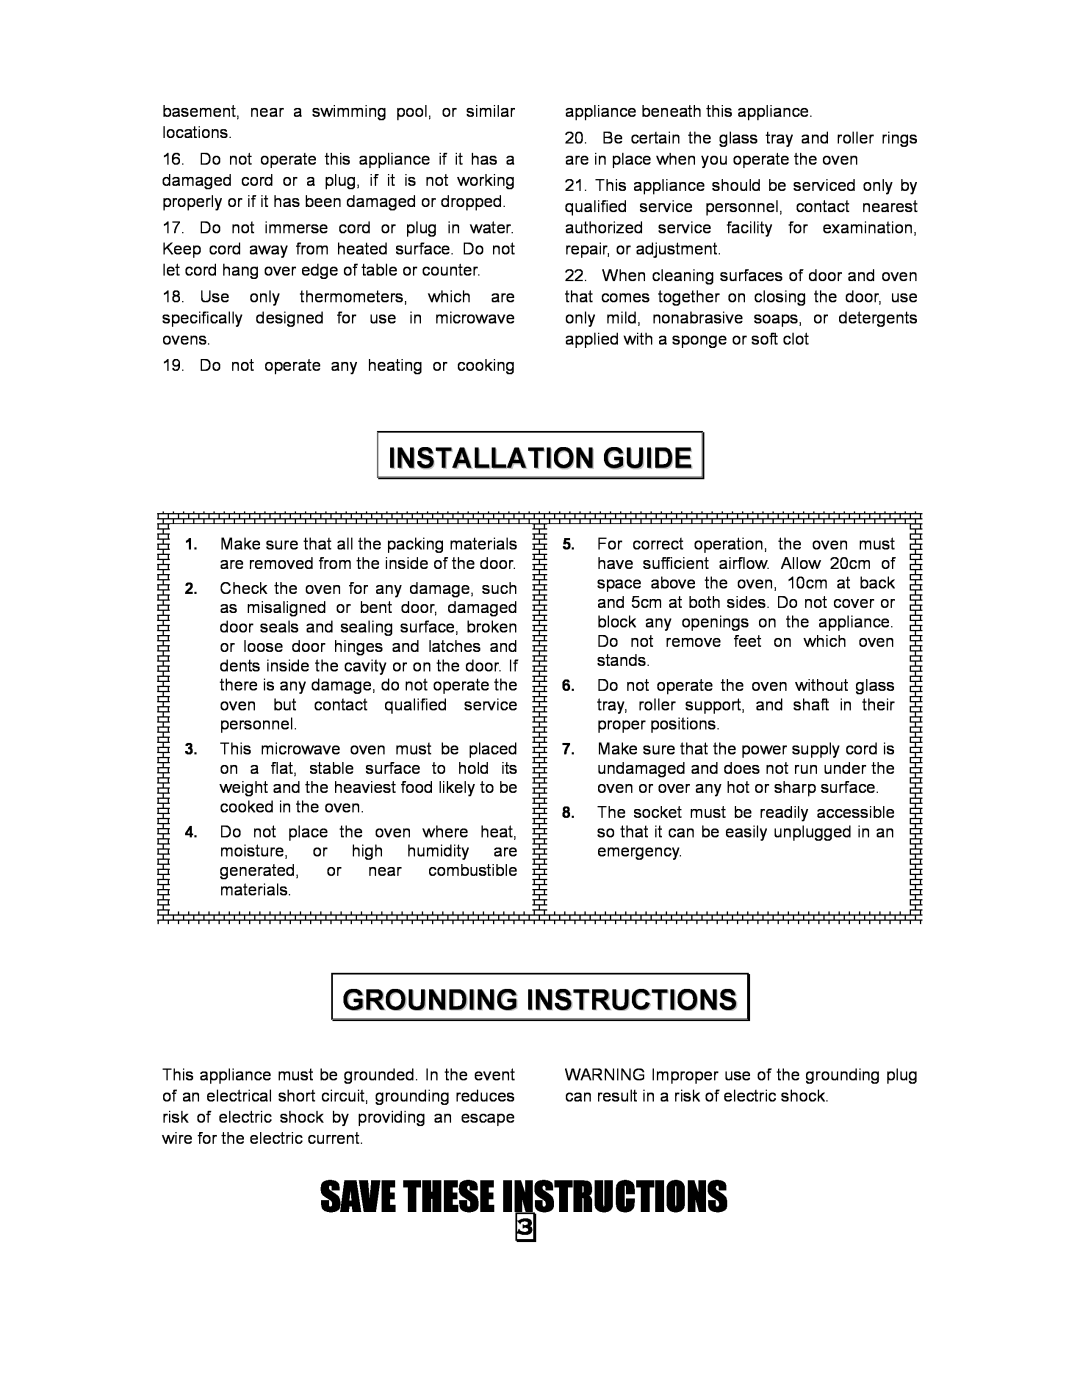 Kenmore 87043 owner manual Installation Guide, Grounding Instructions, Save These Instructions 